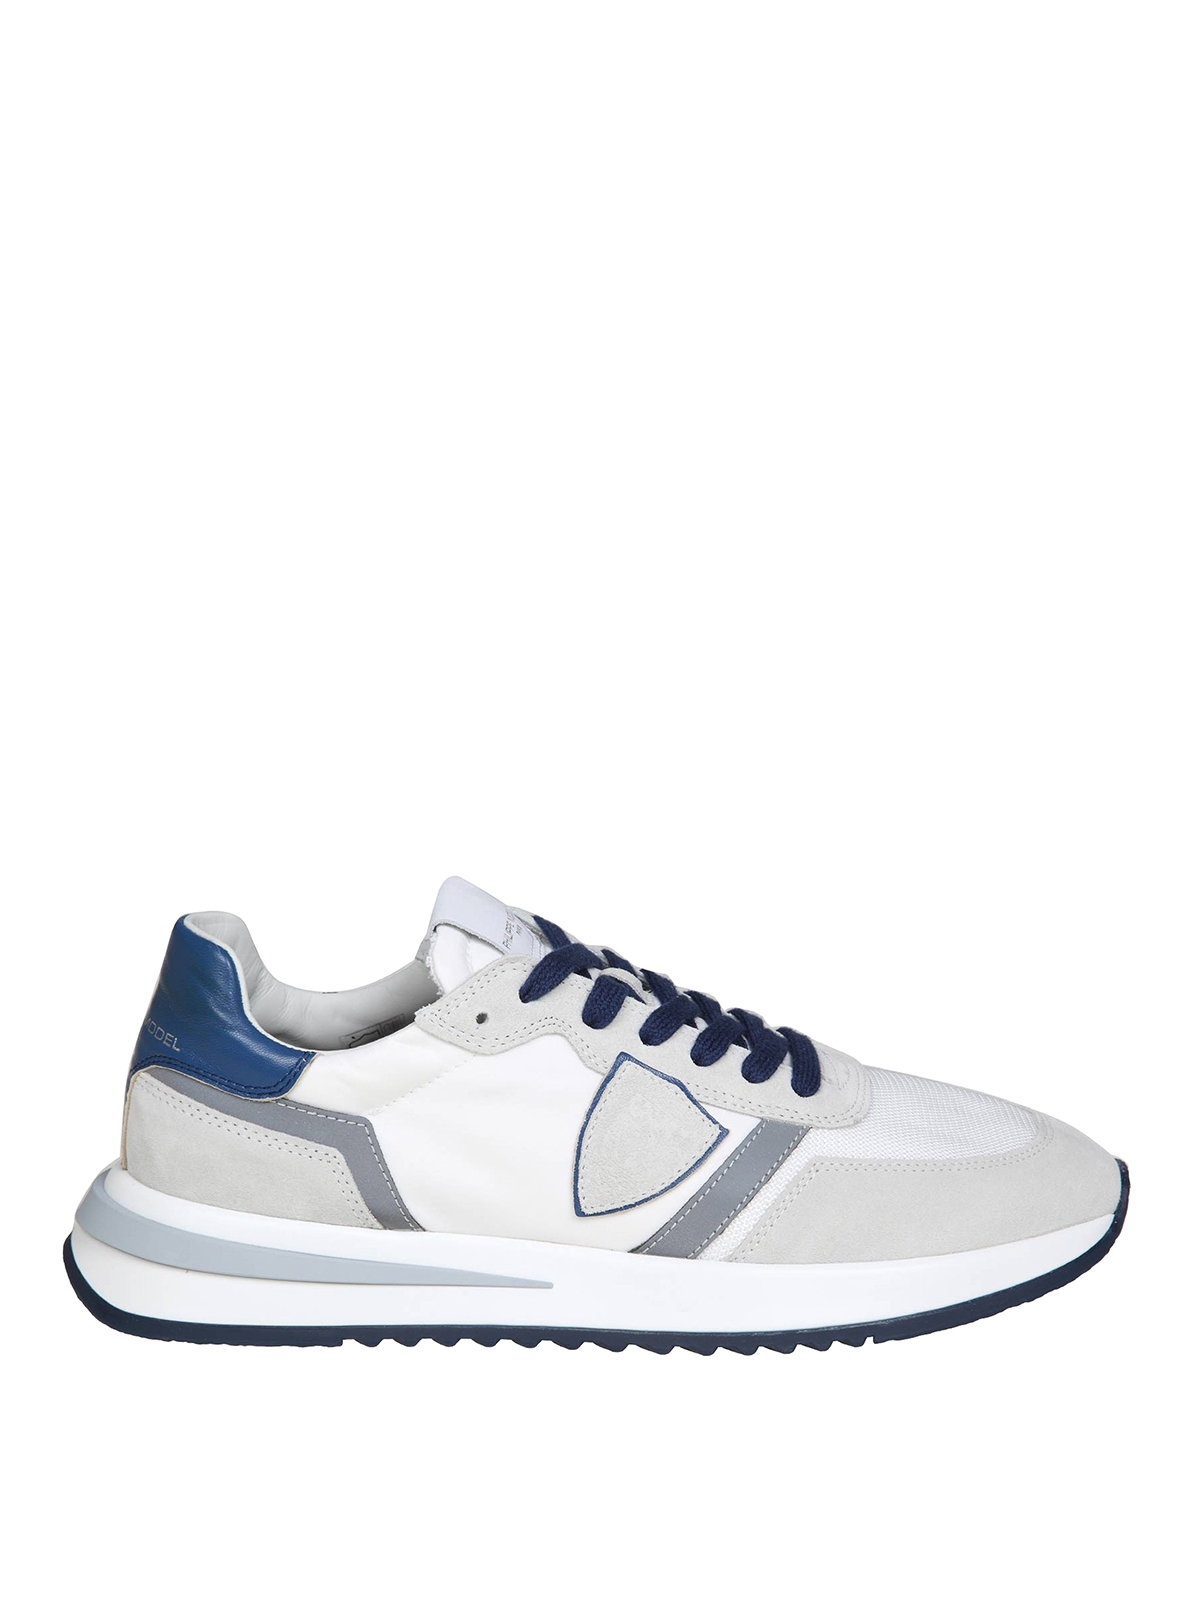 Philippe Model Tropez In White And Blue Suede